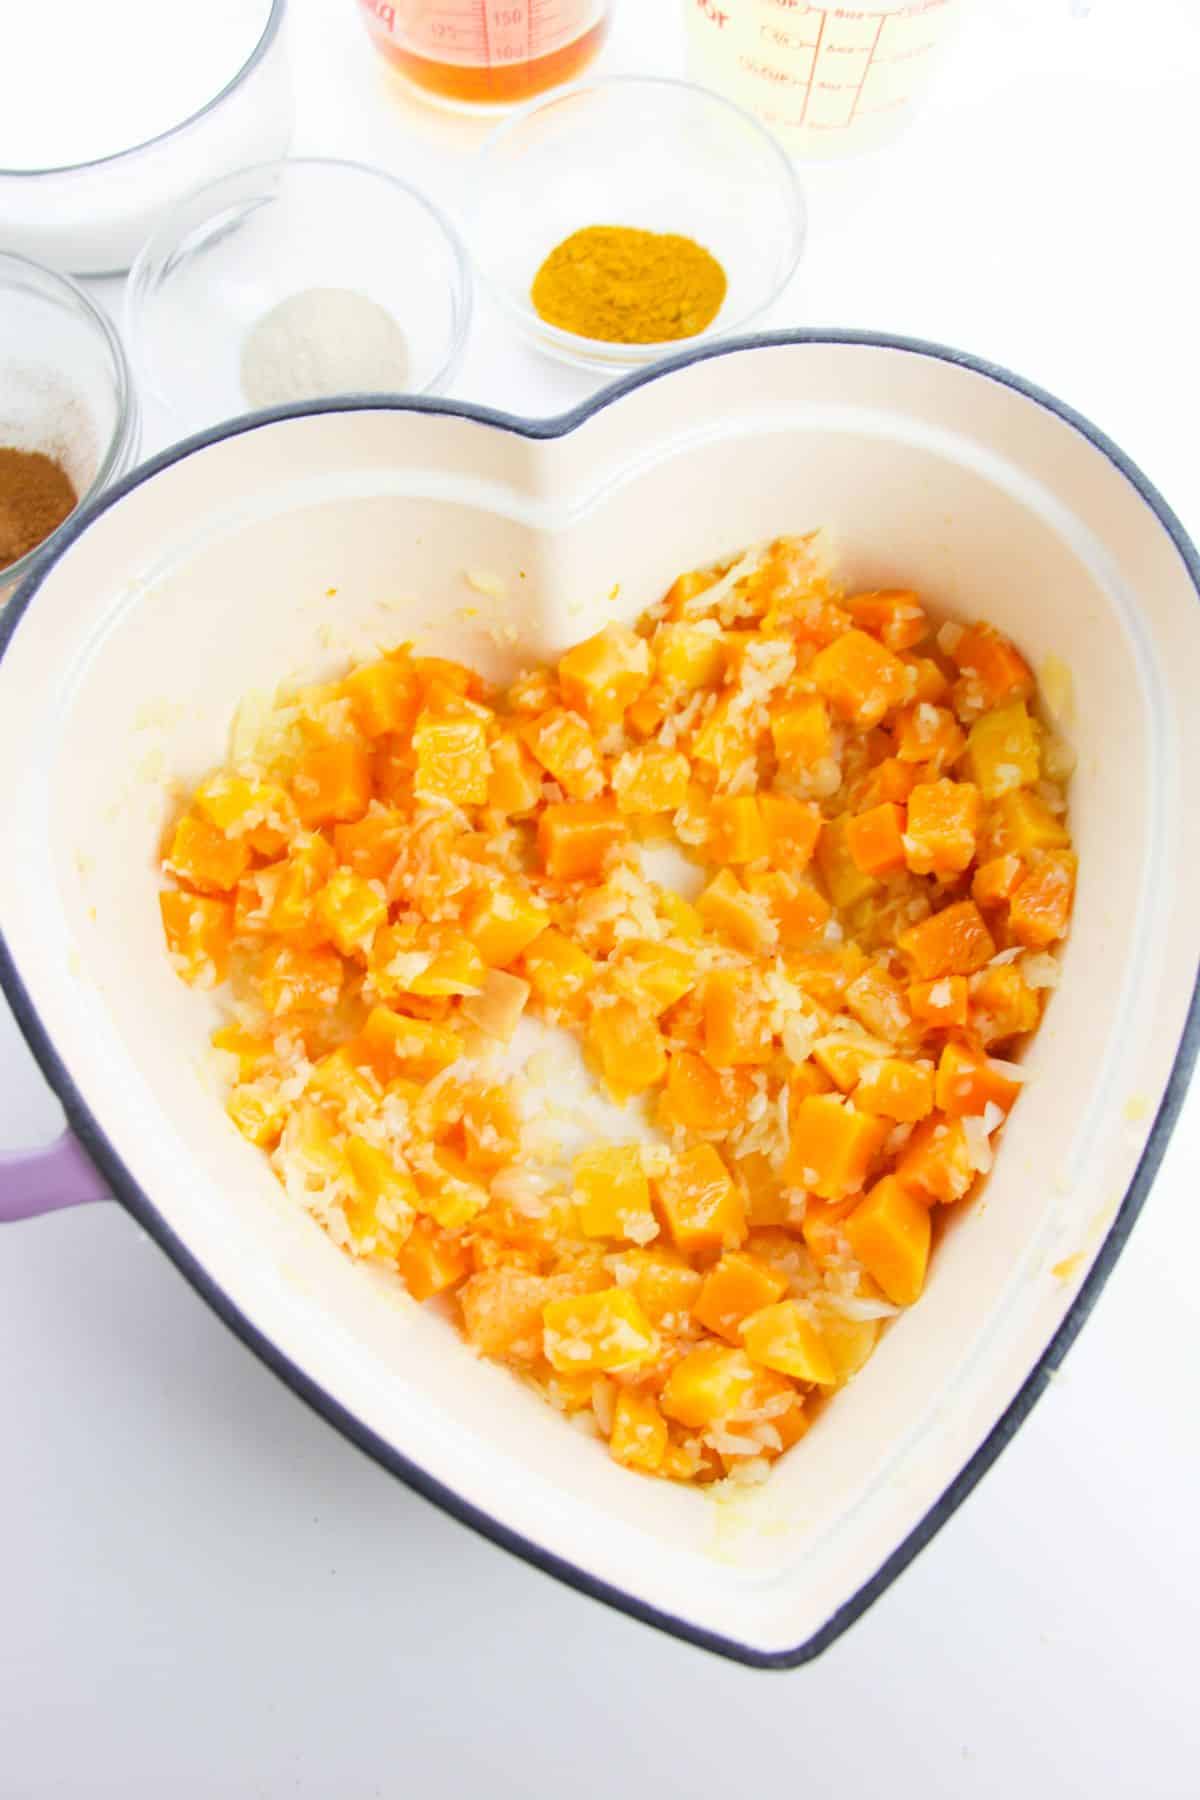 Onion and butternut squash in a large heart-shaped pot.